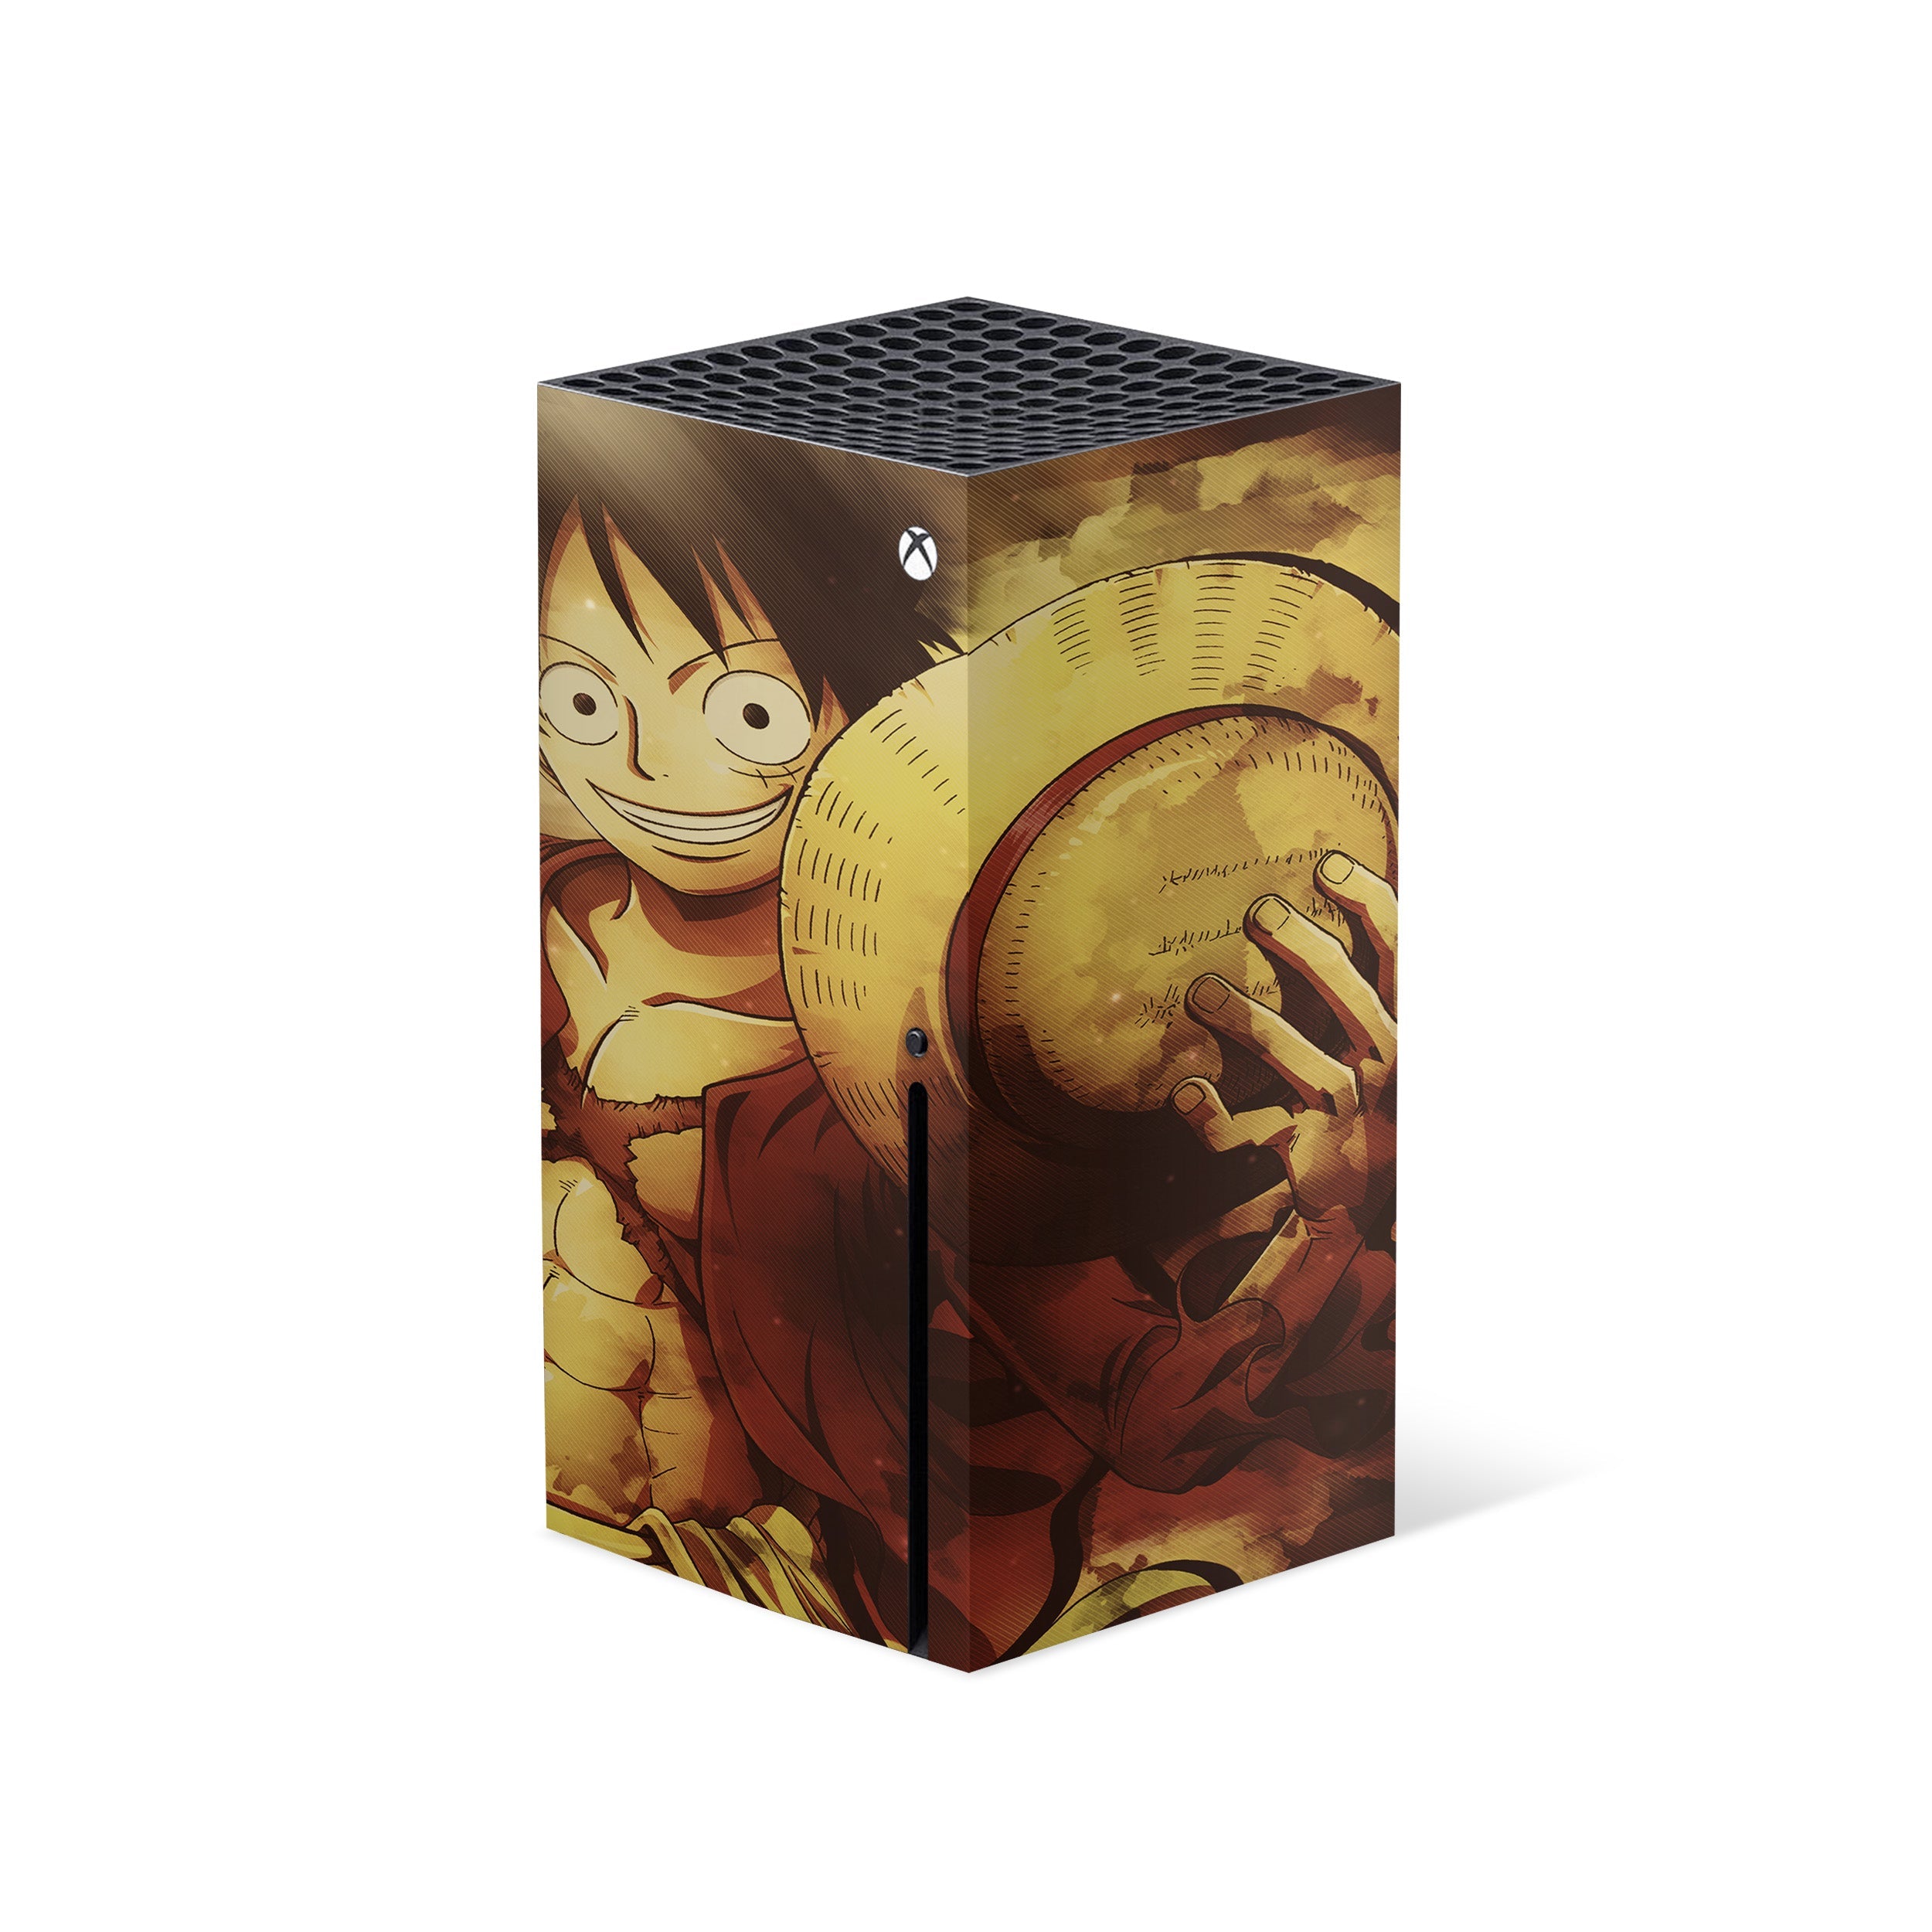 A video game skin featuring a One Piece Monkey D Luffy design for the Xbox Series X.